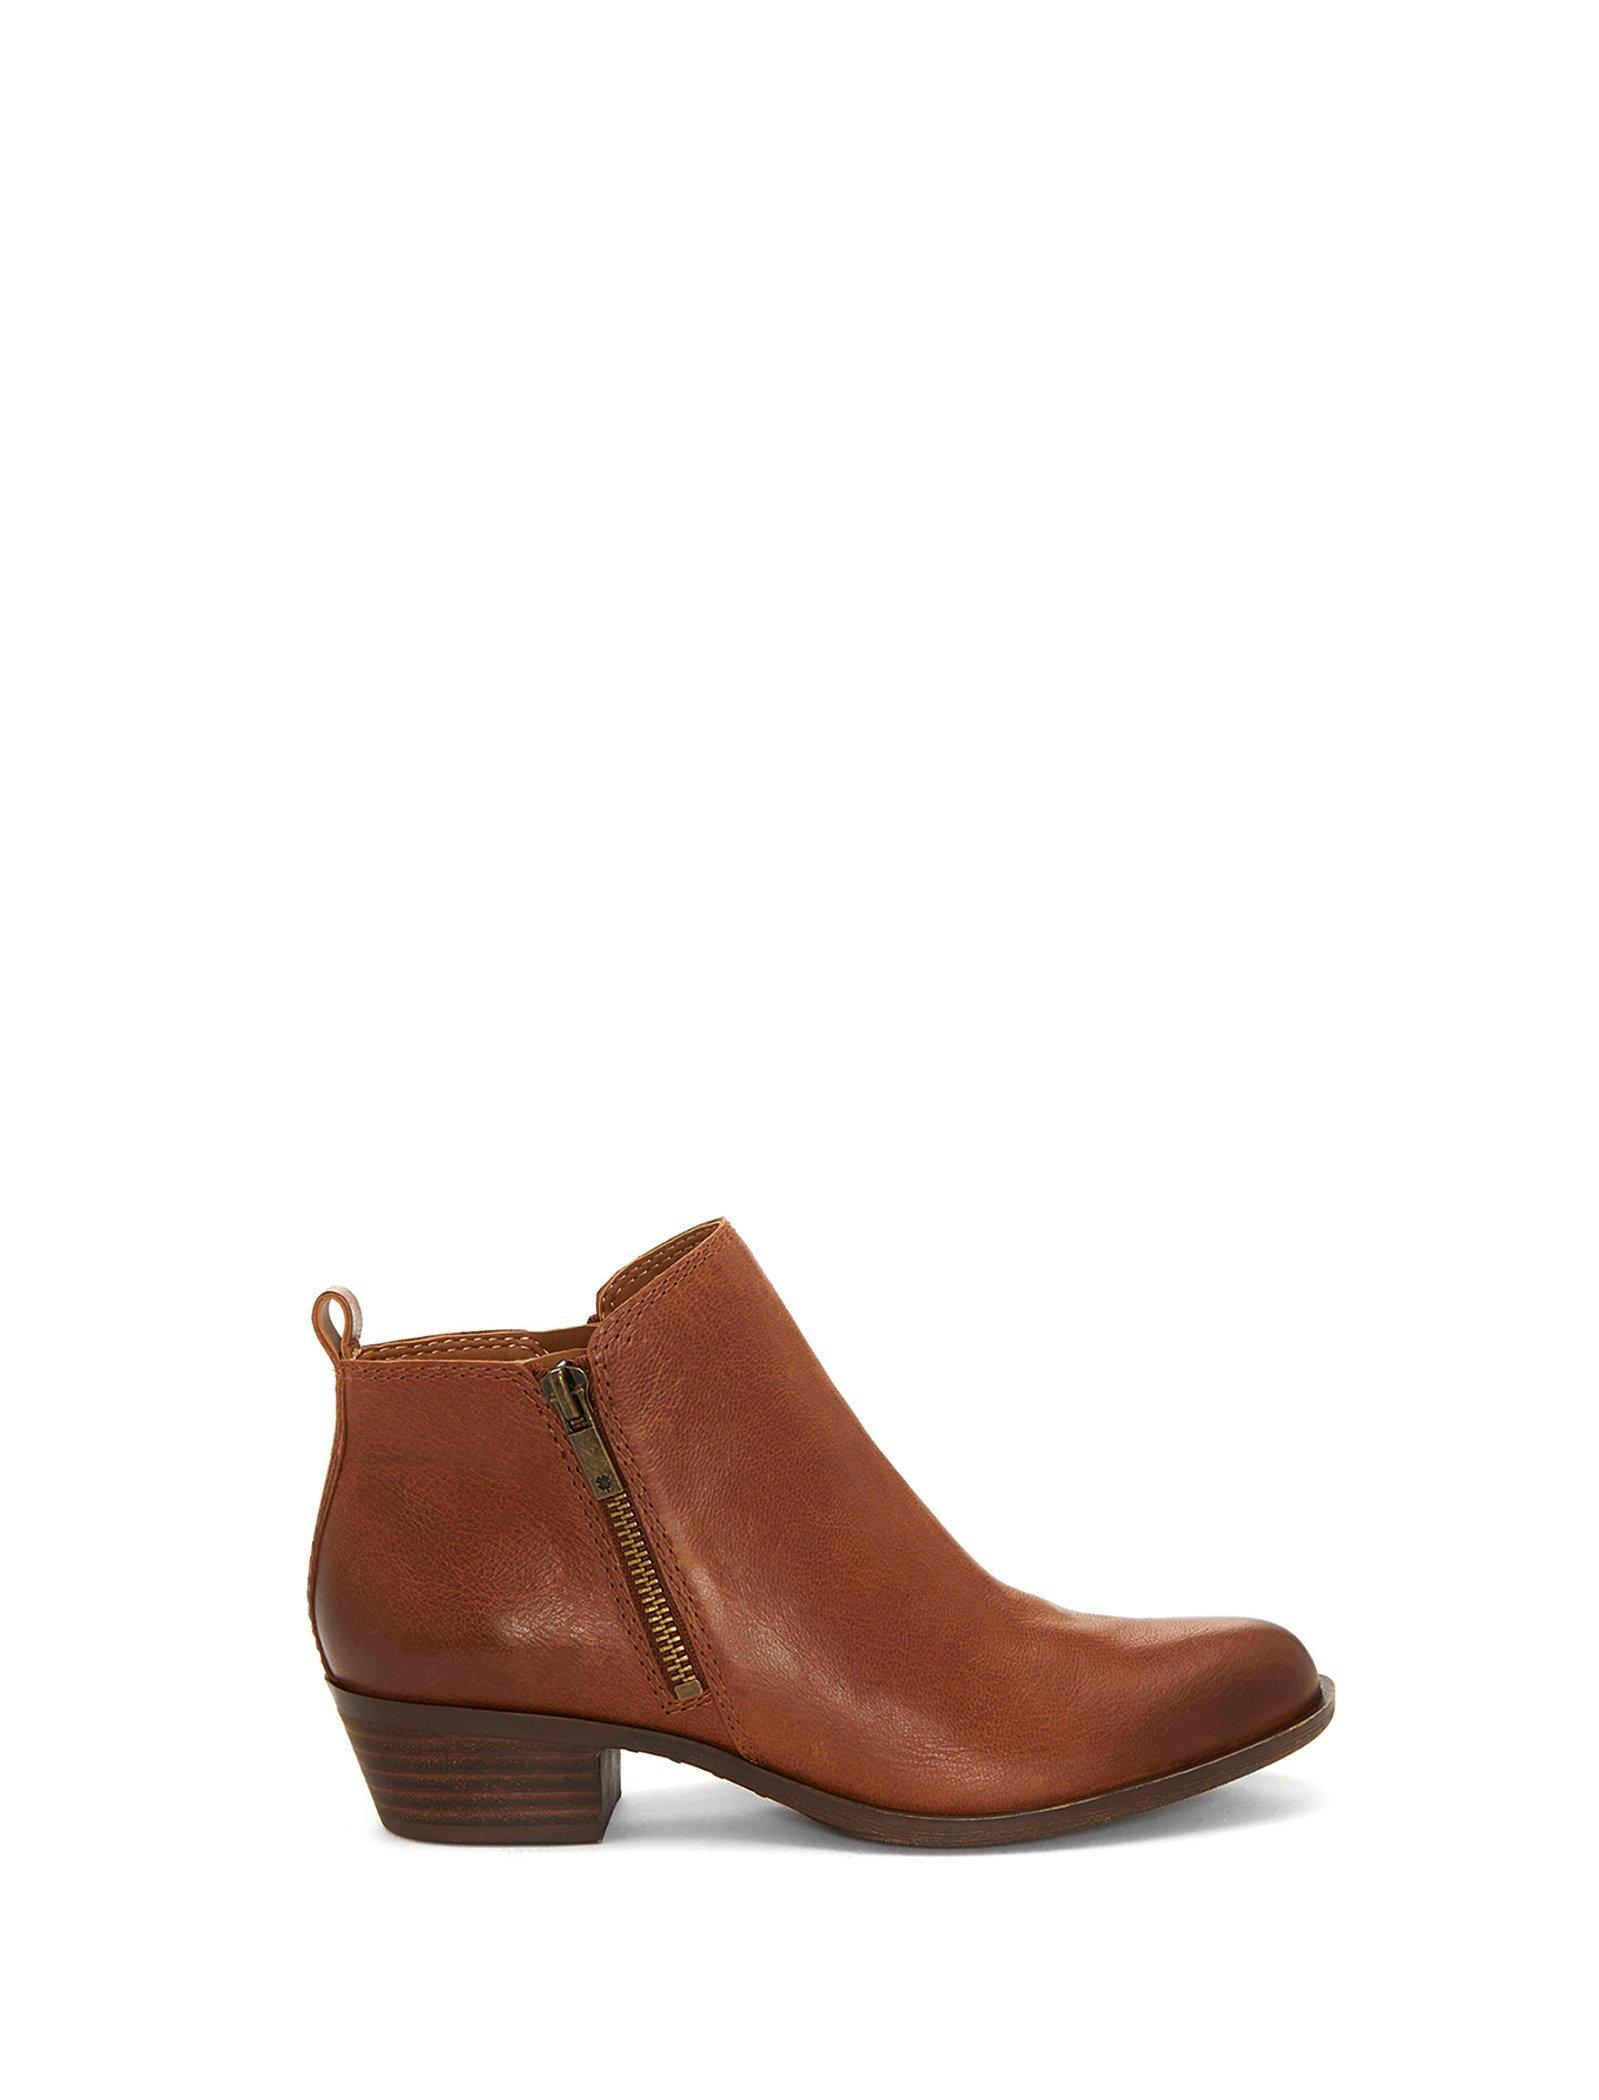 BASEL LEATHER FLAT BOOTIE, image 7